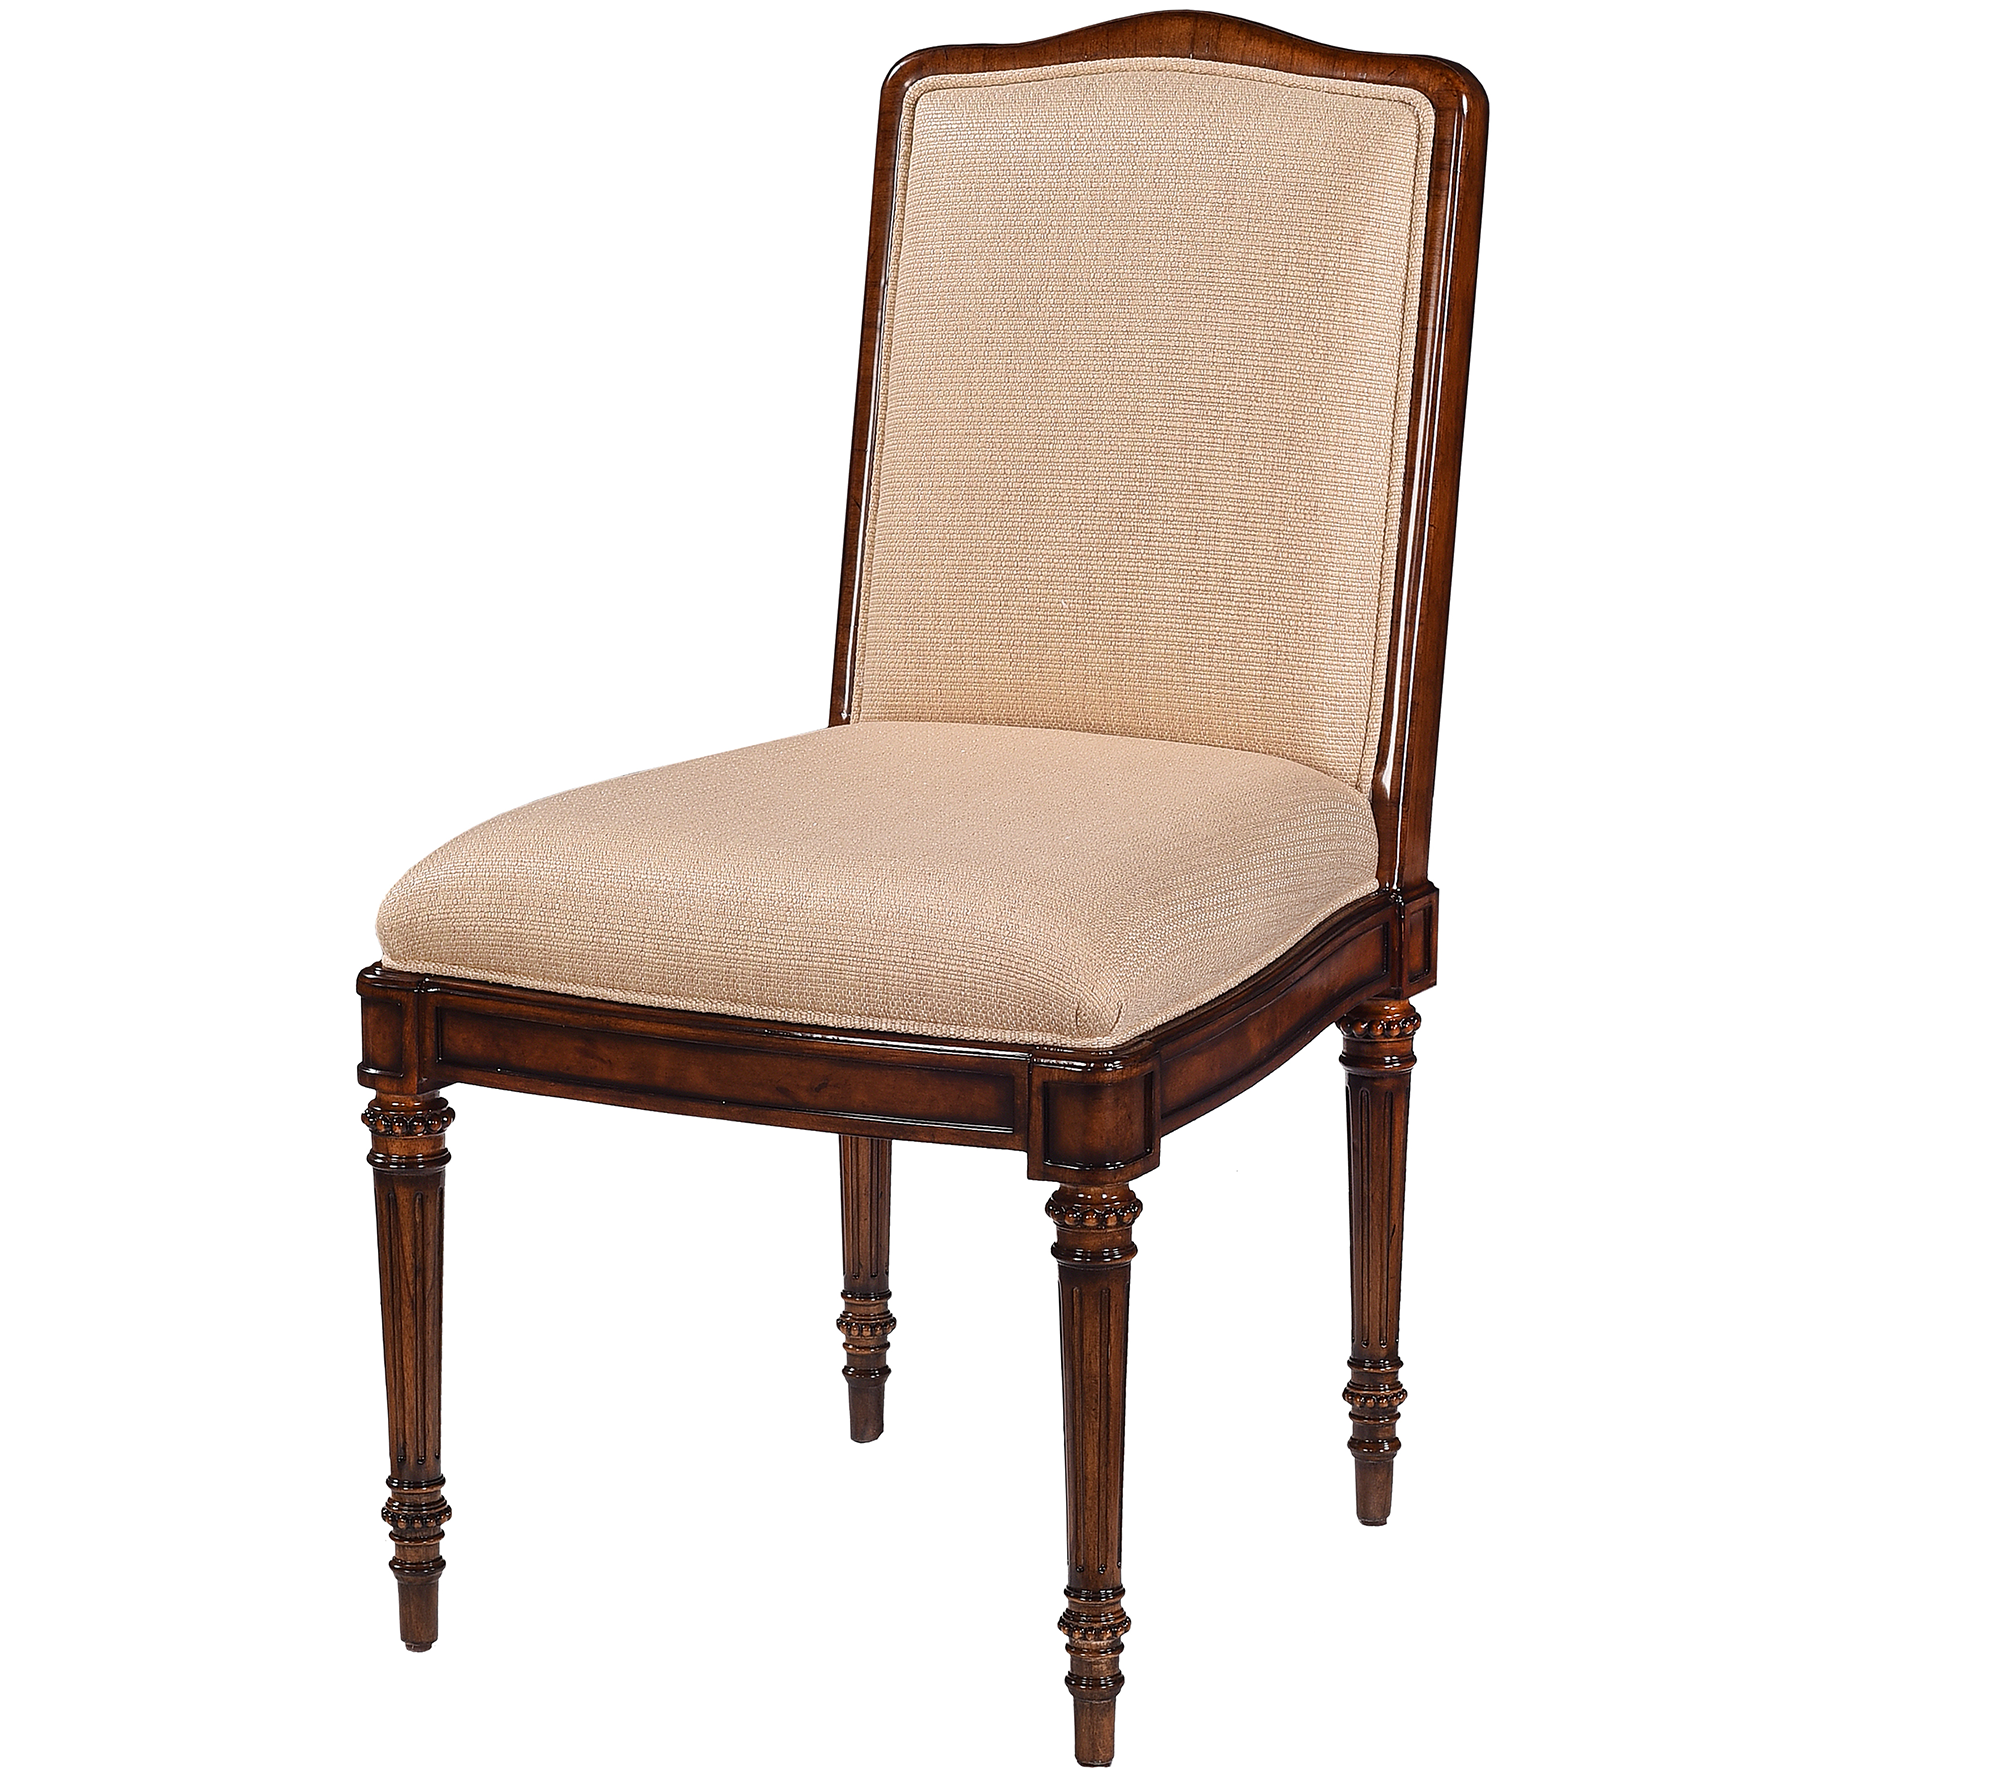 The Dressing chair in Evita Straw